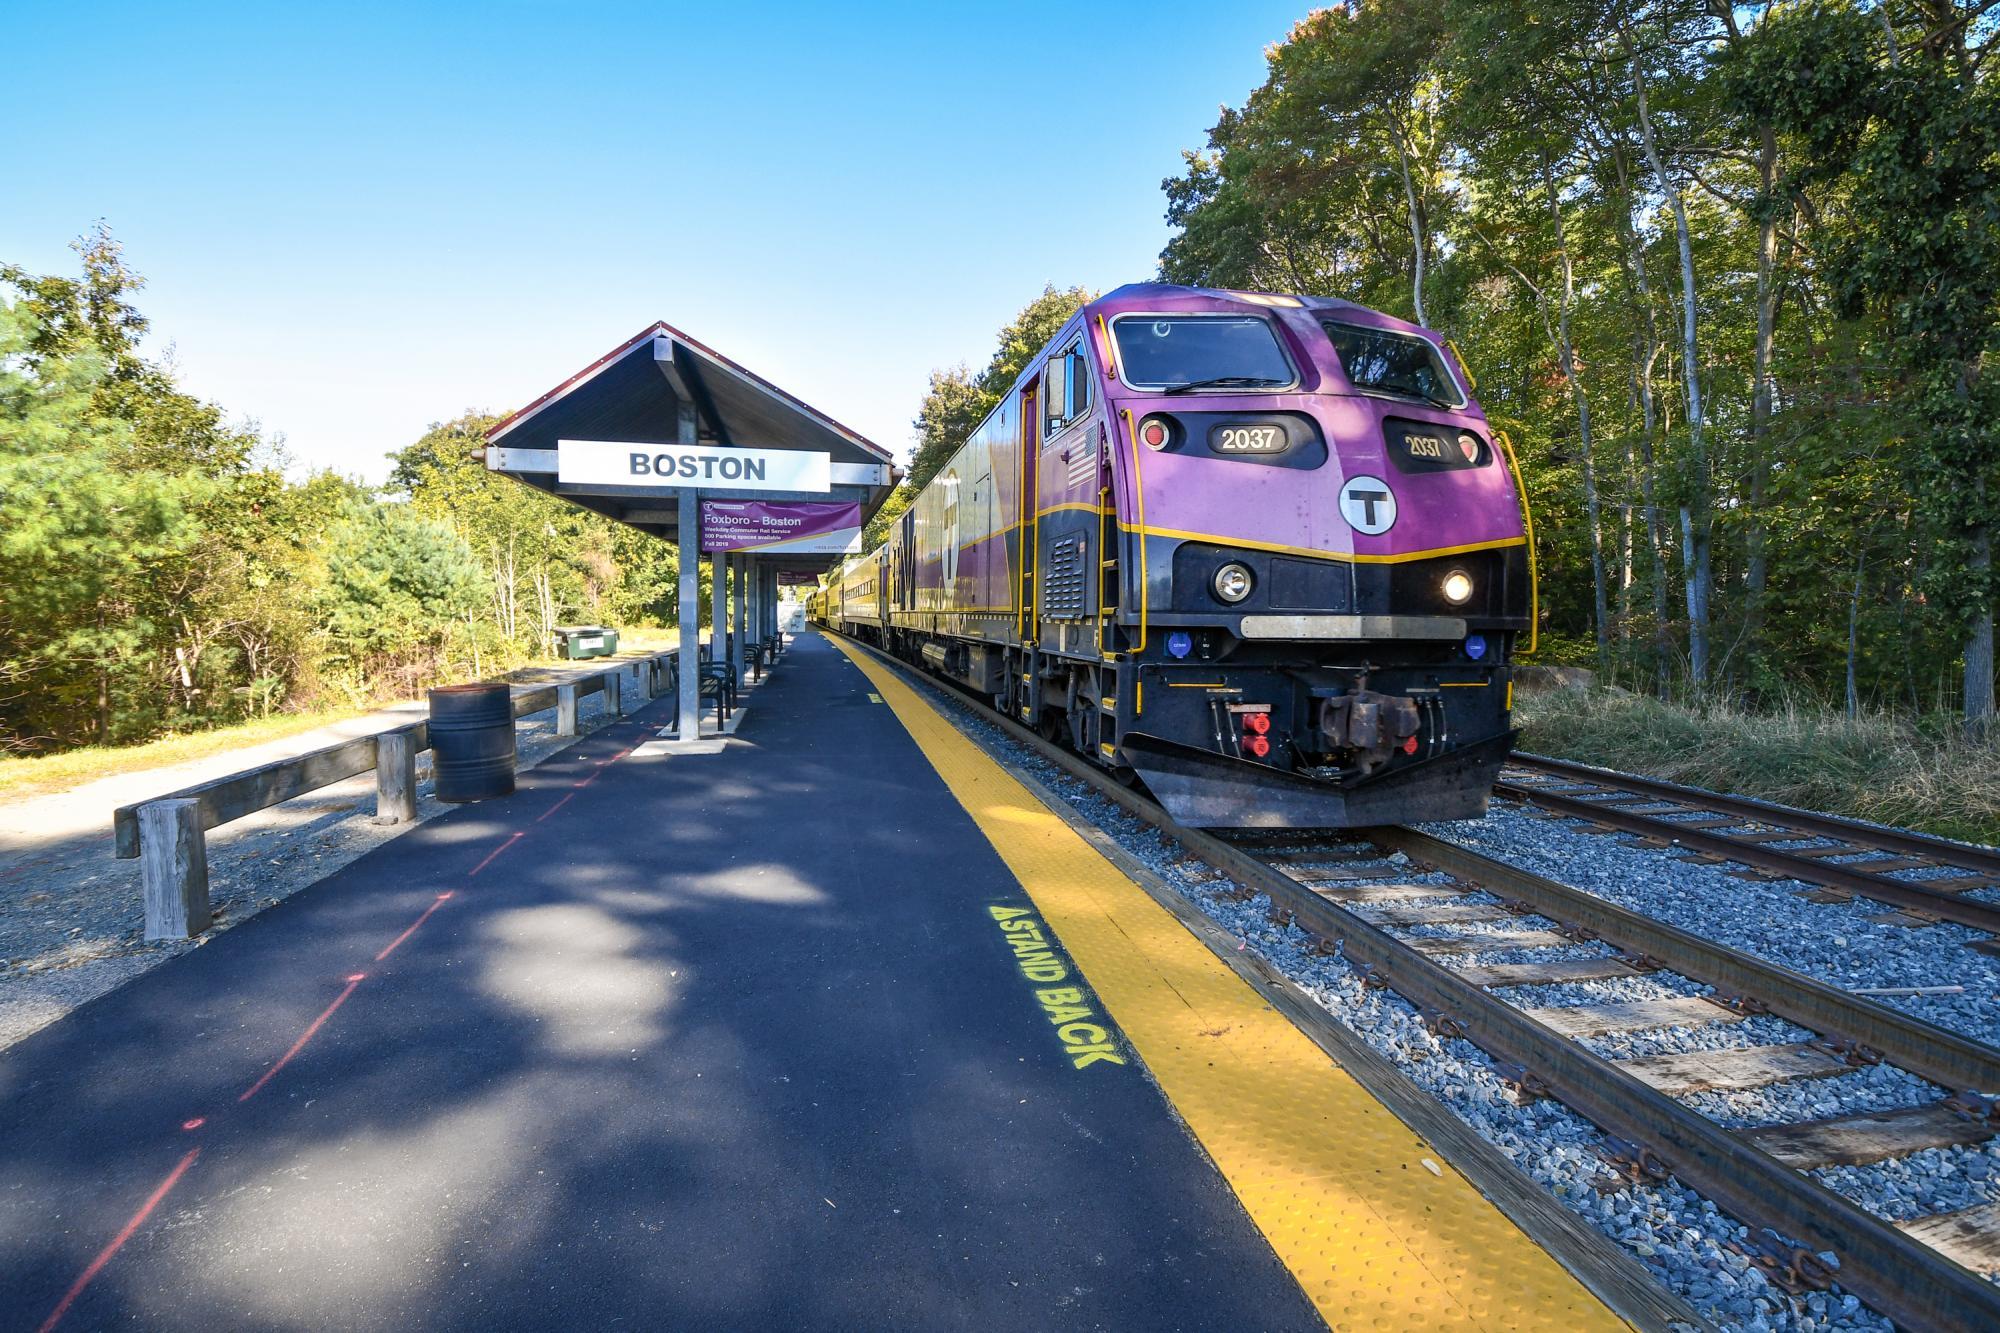 A Commuter Rail train pulls away from Foxboro Station, inbound for Boston. In the background is a sign adveristing the Foxboro - Boston weekday pilot.